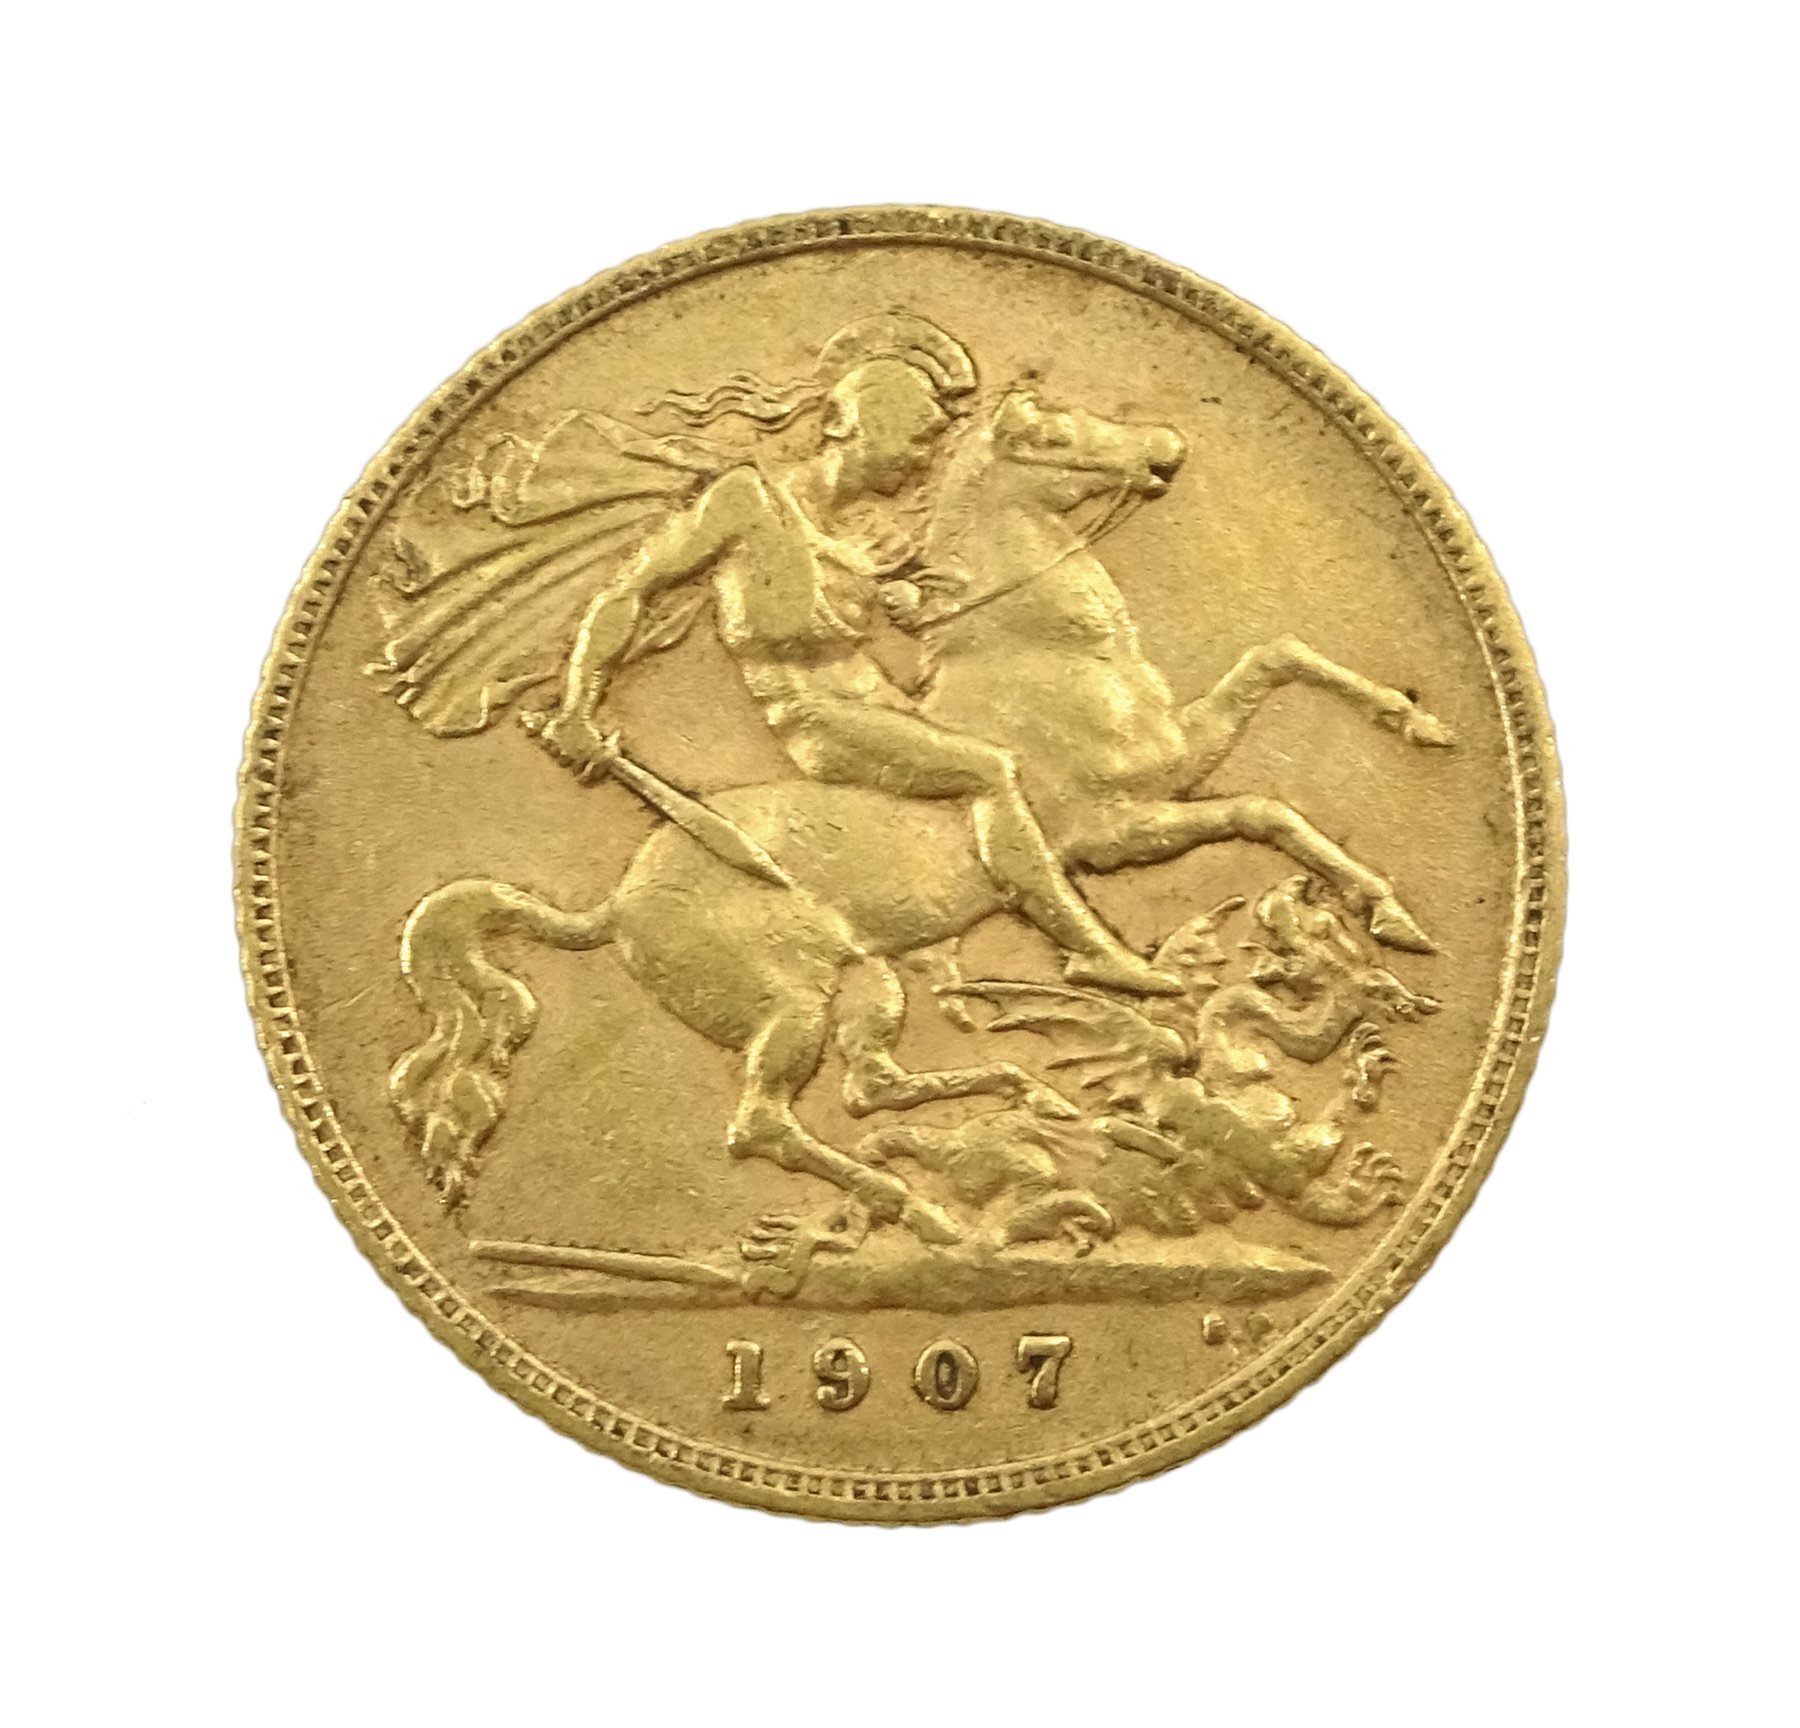 King Edward VII 1907 gold half sovereign coin - Jewellery, Watches